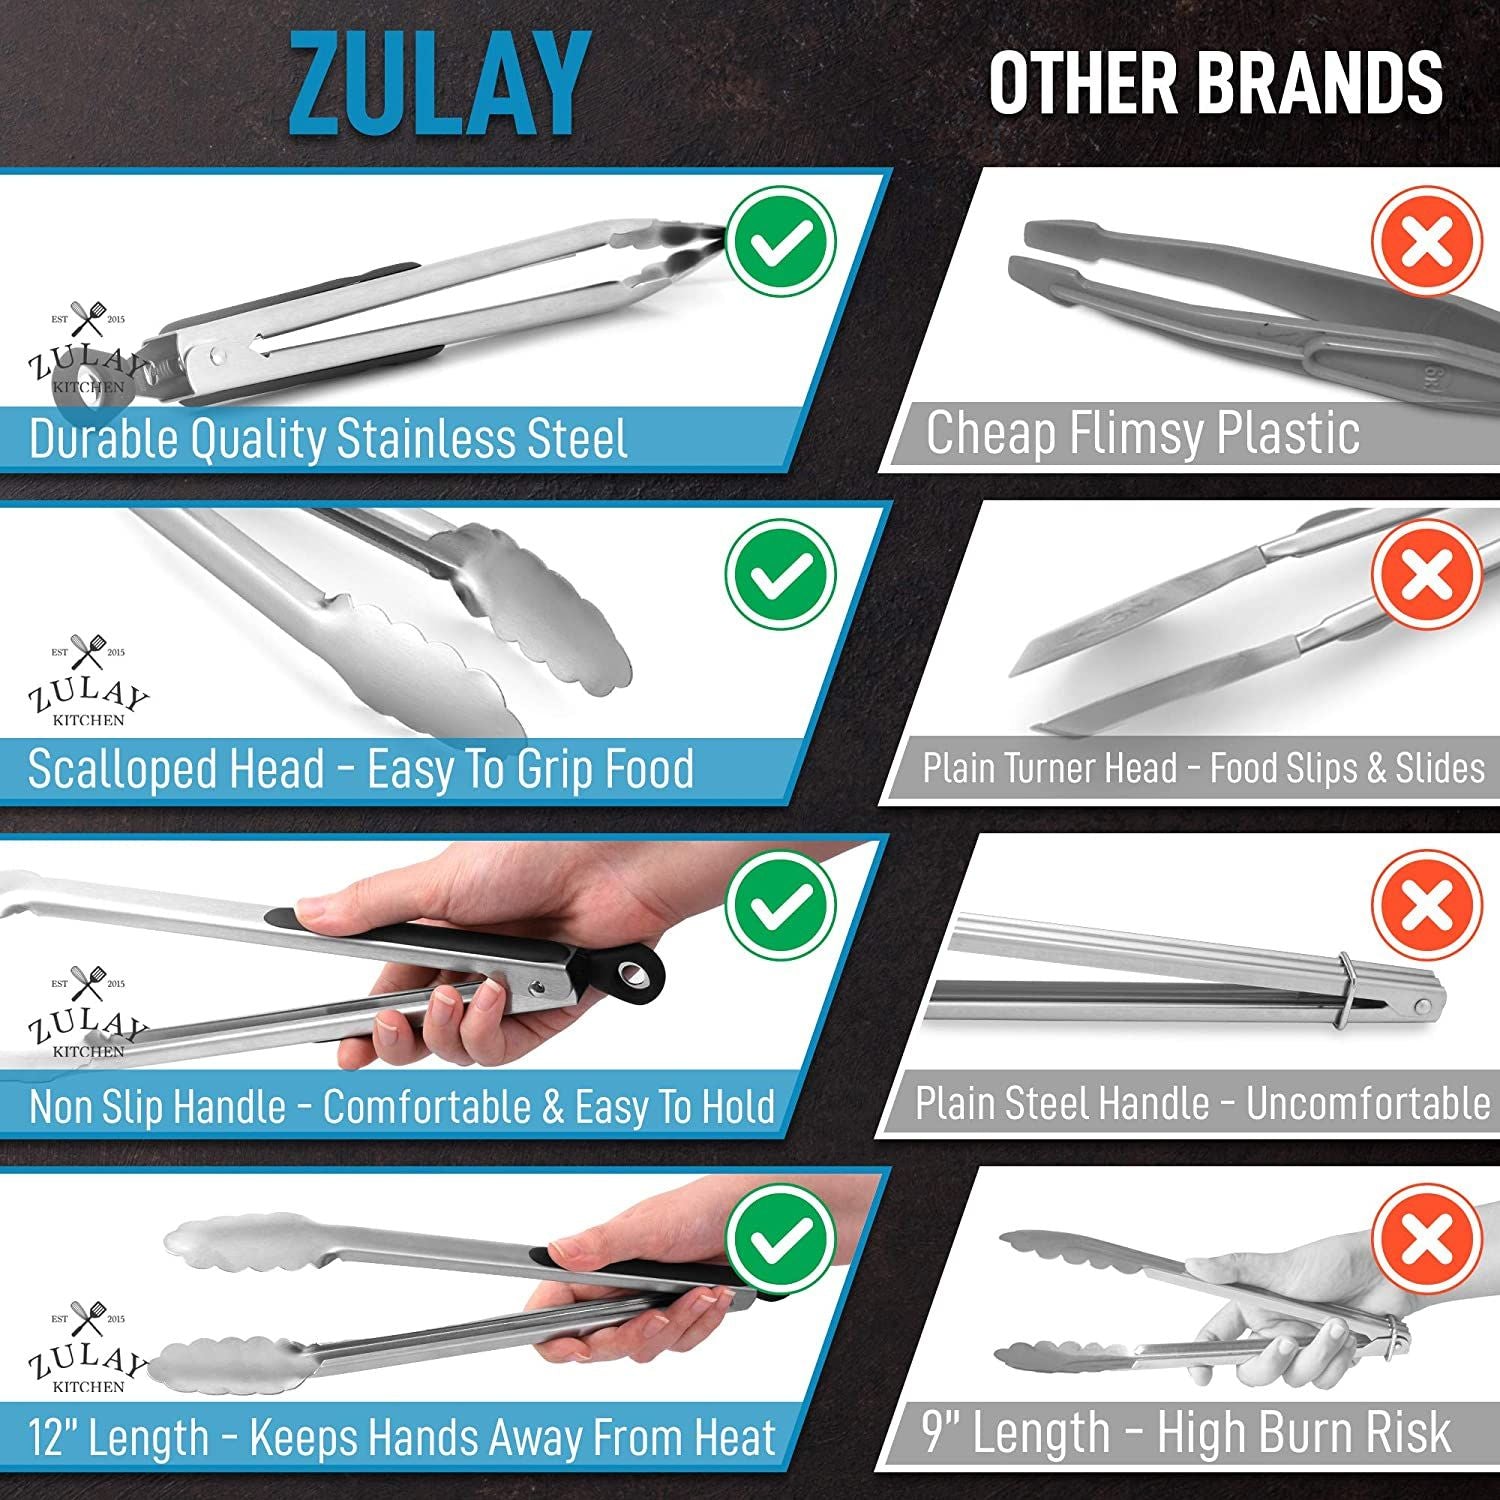 Zulay 2 Pack 9 inch & 12 inch Tongs for Cooking with Silicone Tips - Stainless Steel Kitchen Tongs with Lock Mechanism - Silver - Red